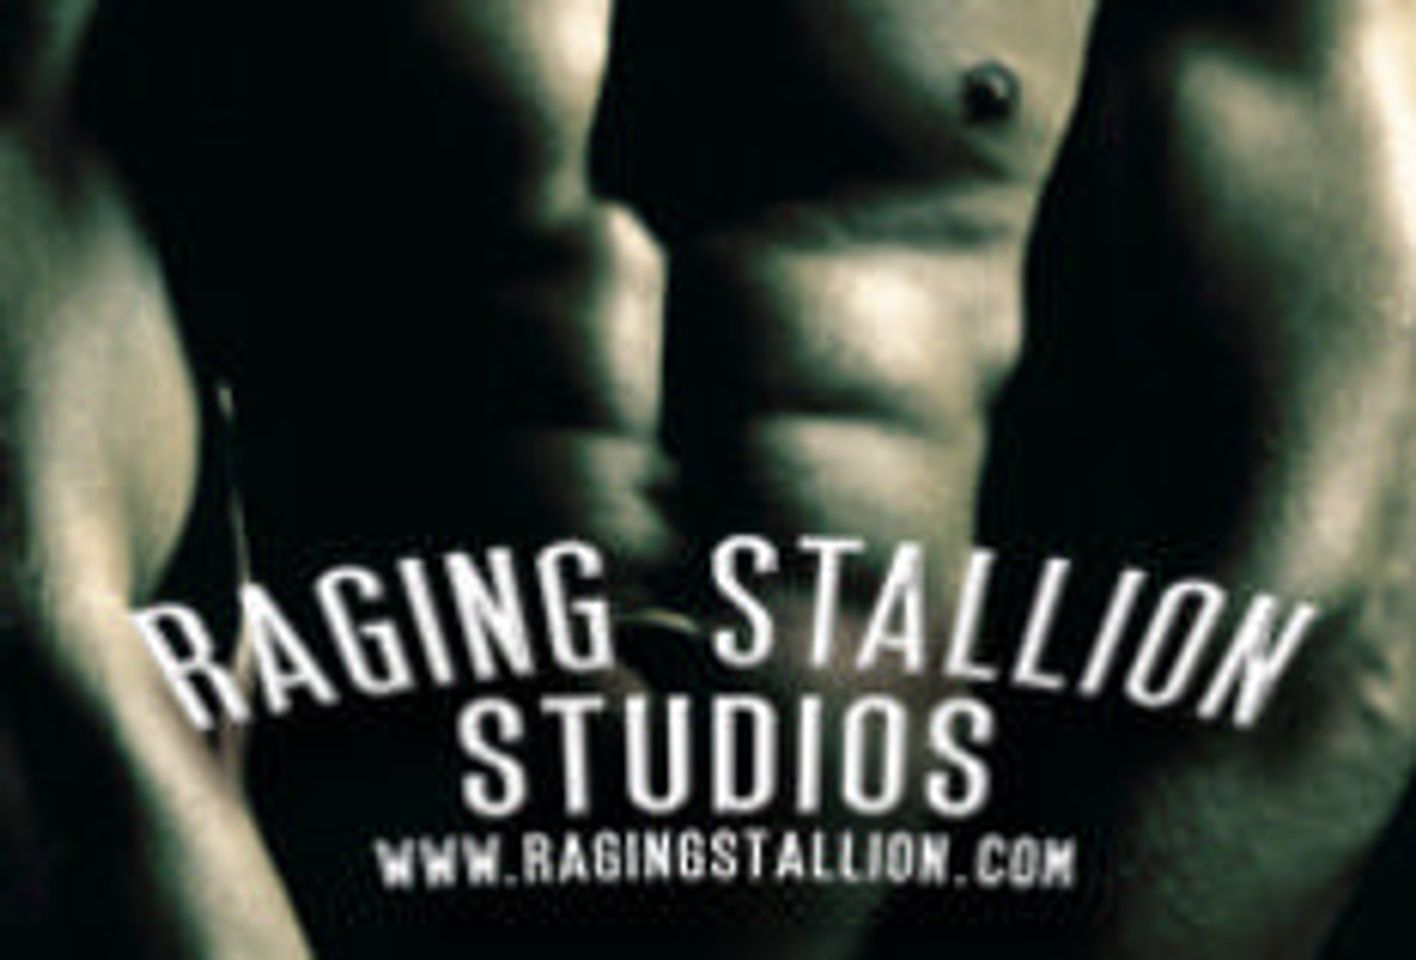 Tag Adams Signed by Raging Stallion to Perform and Direct